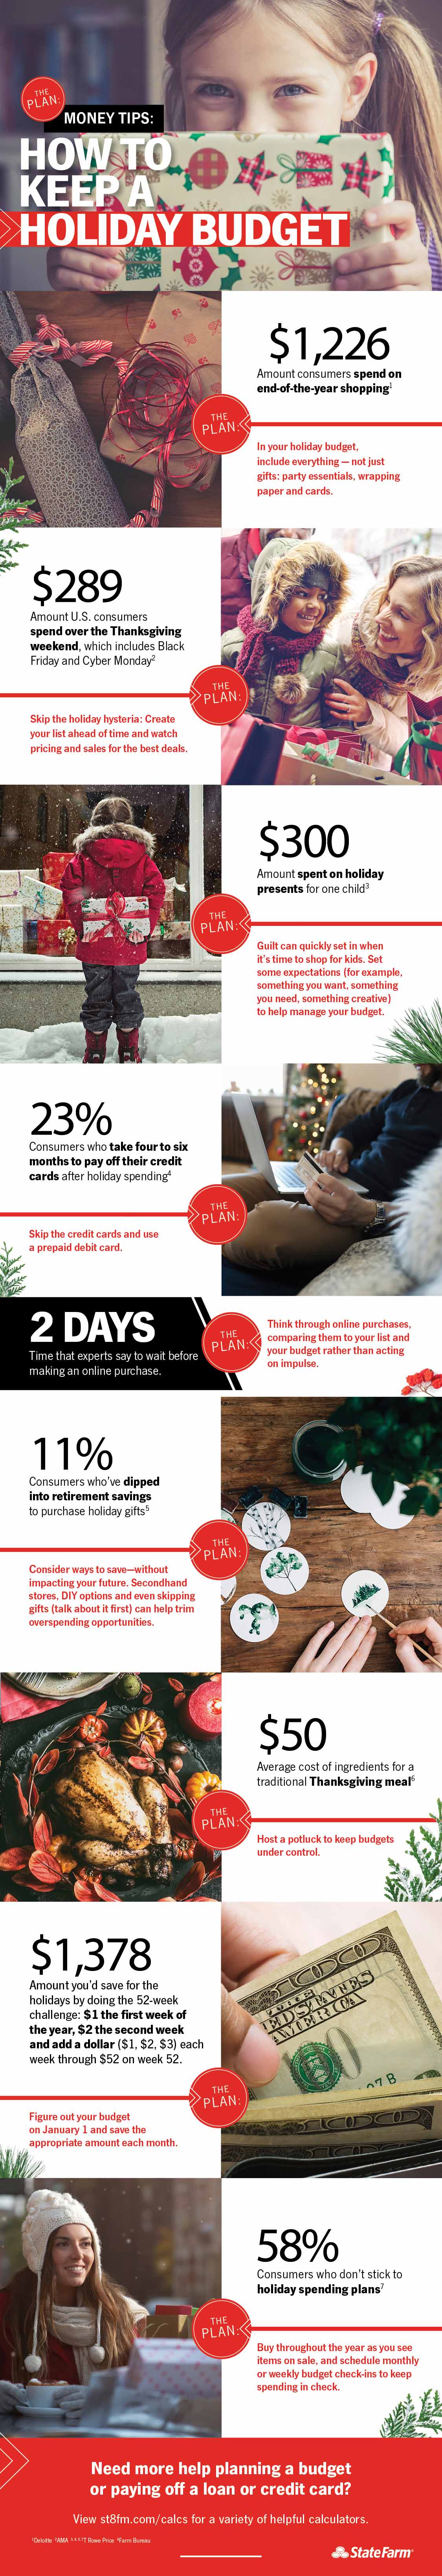 holiday-budget-planning-infographic